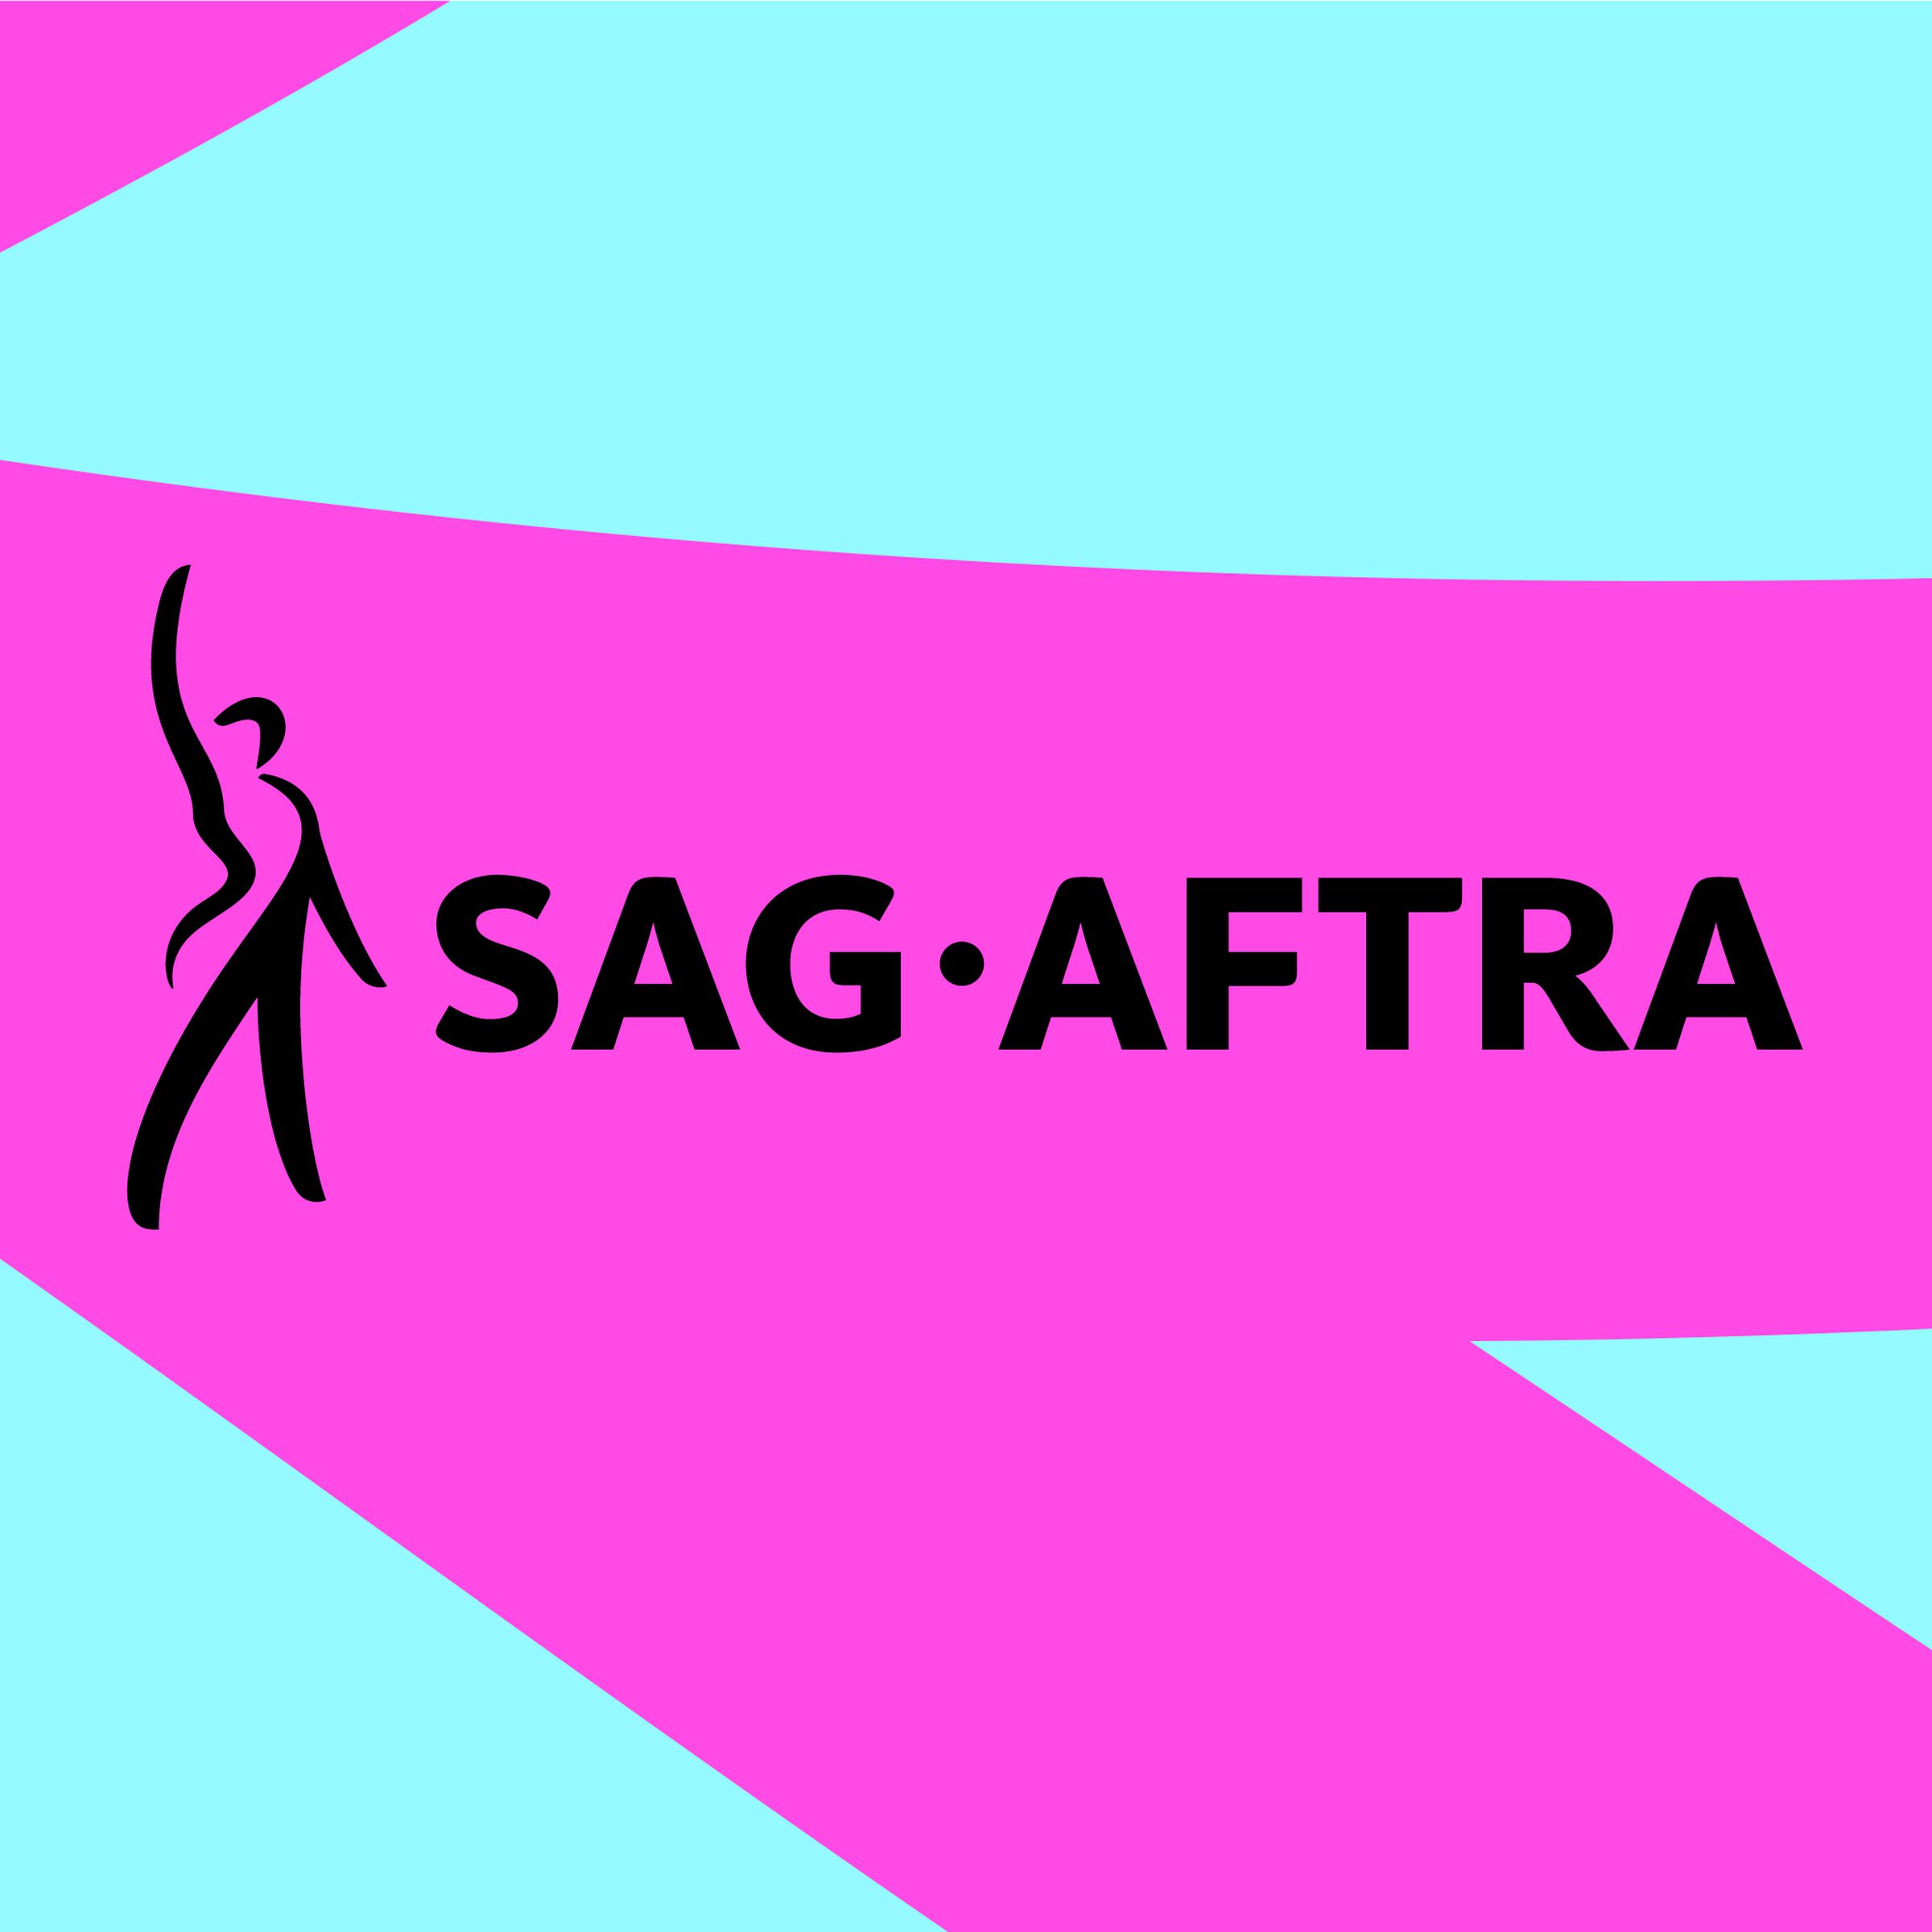 An image showing the SAG-AFTRA logo on a pink and blue background